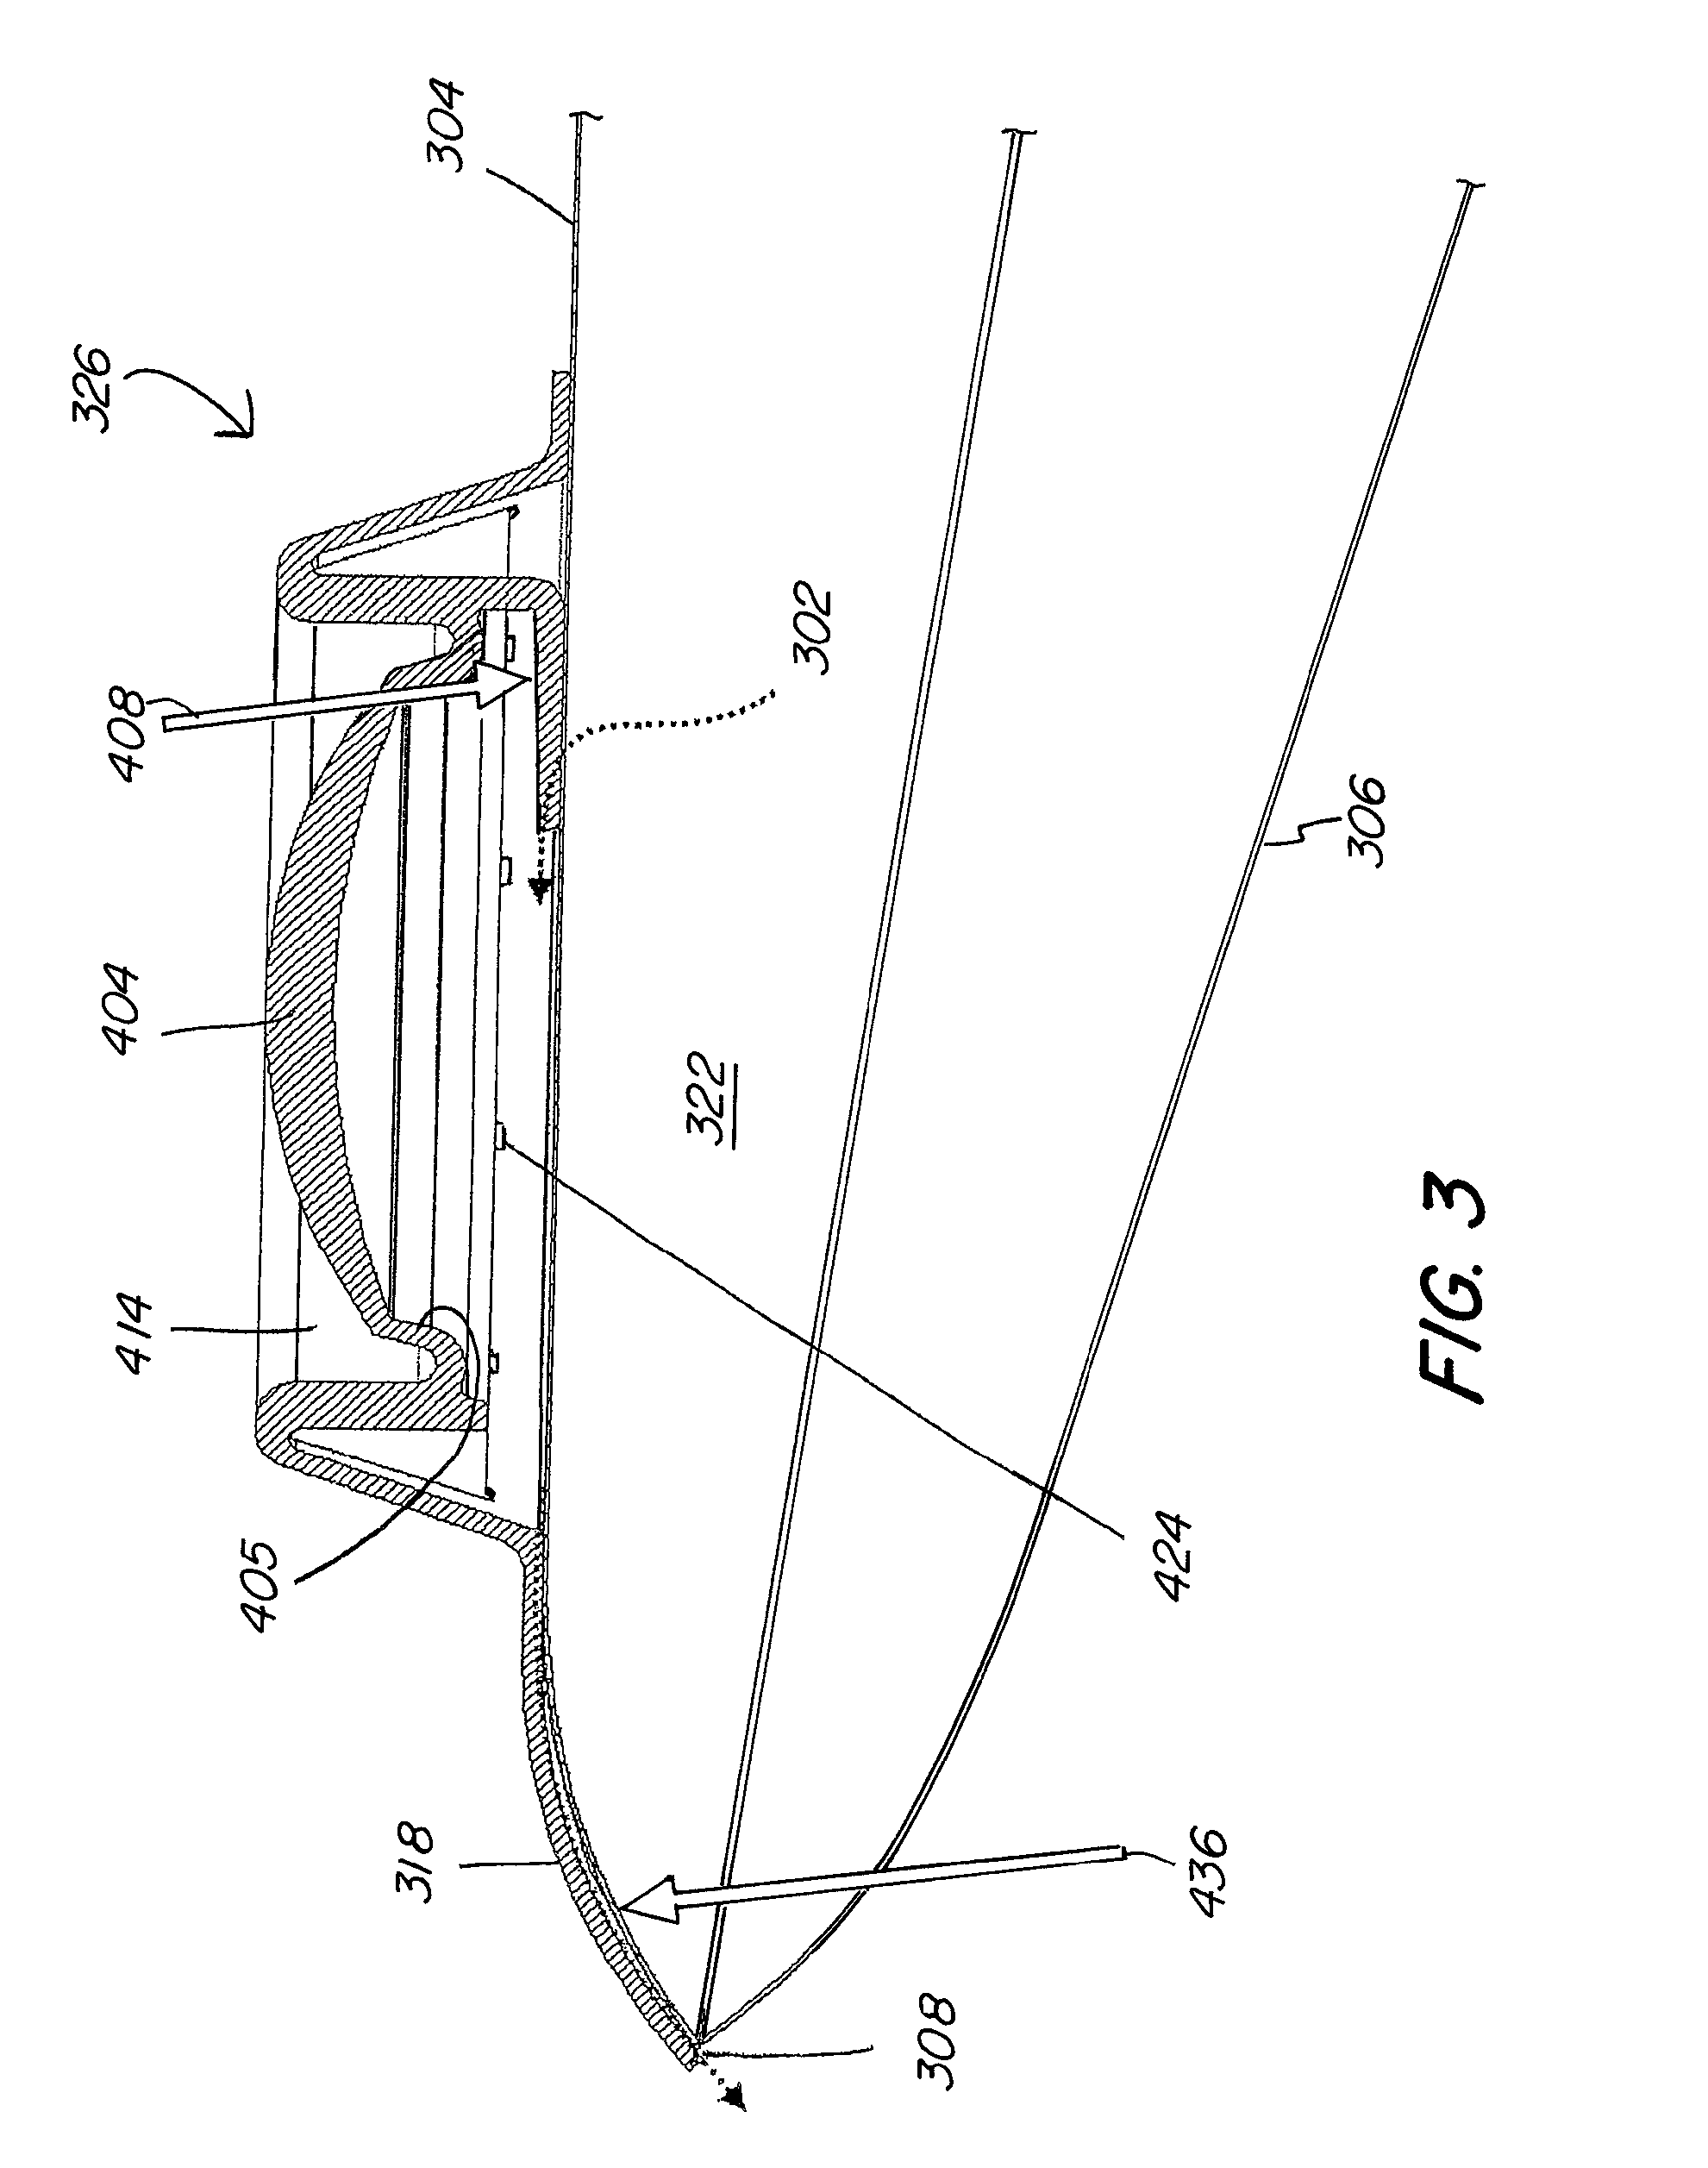 Metering dispensing system with one-piece pump assembly